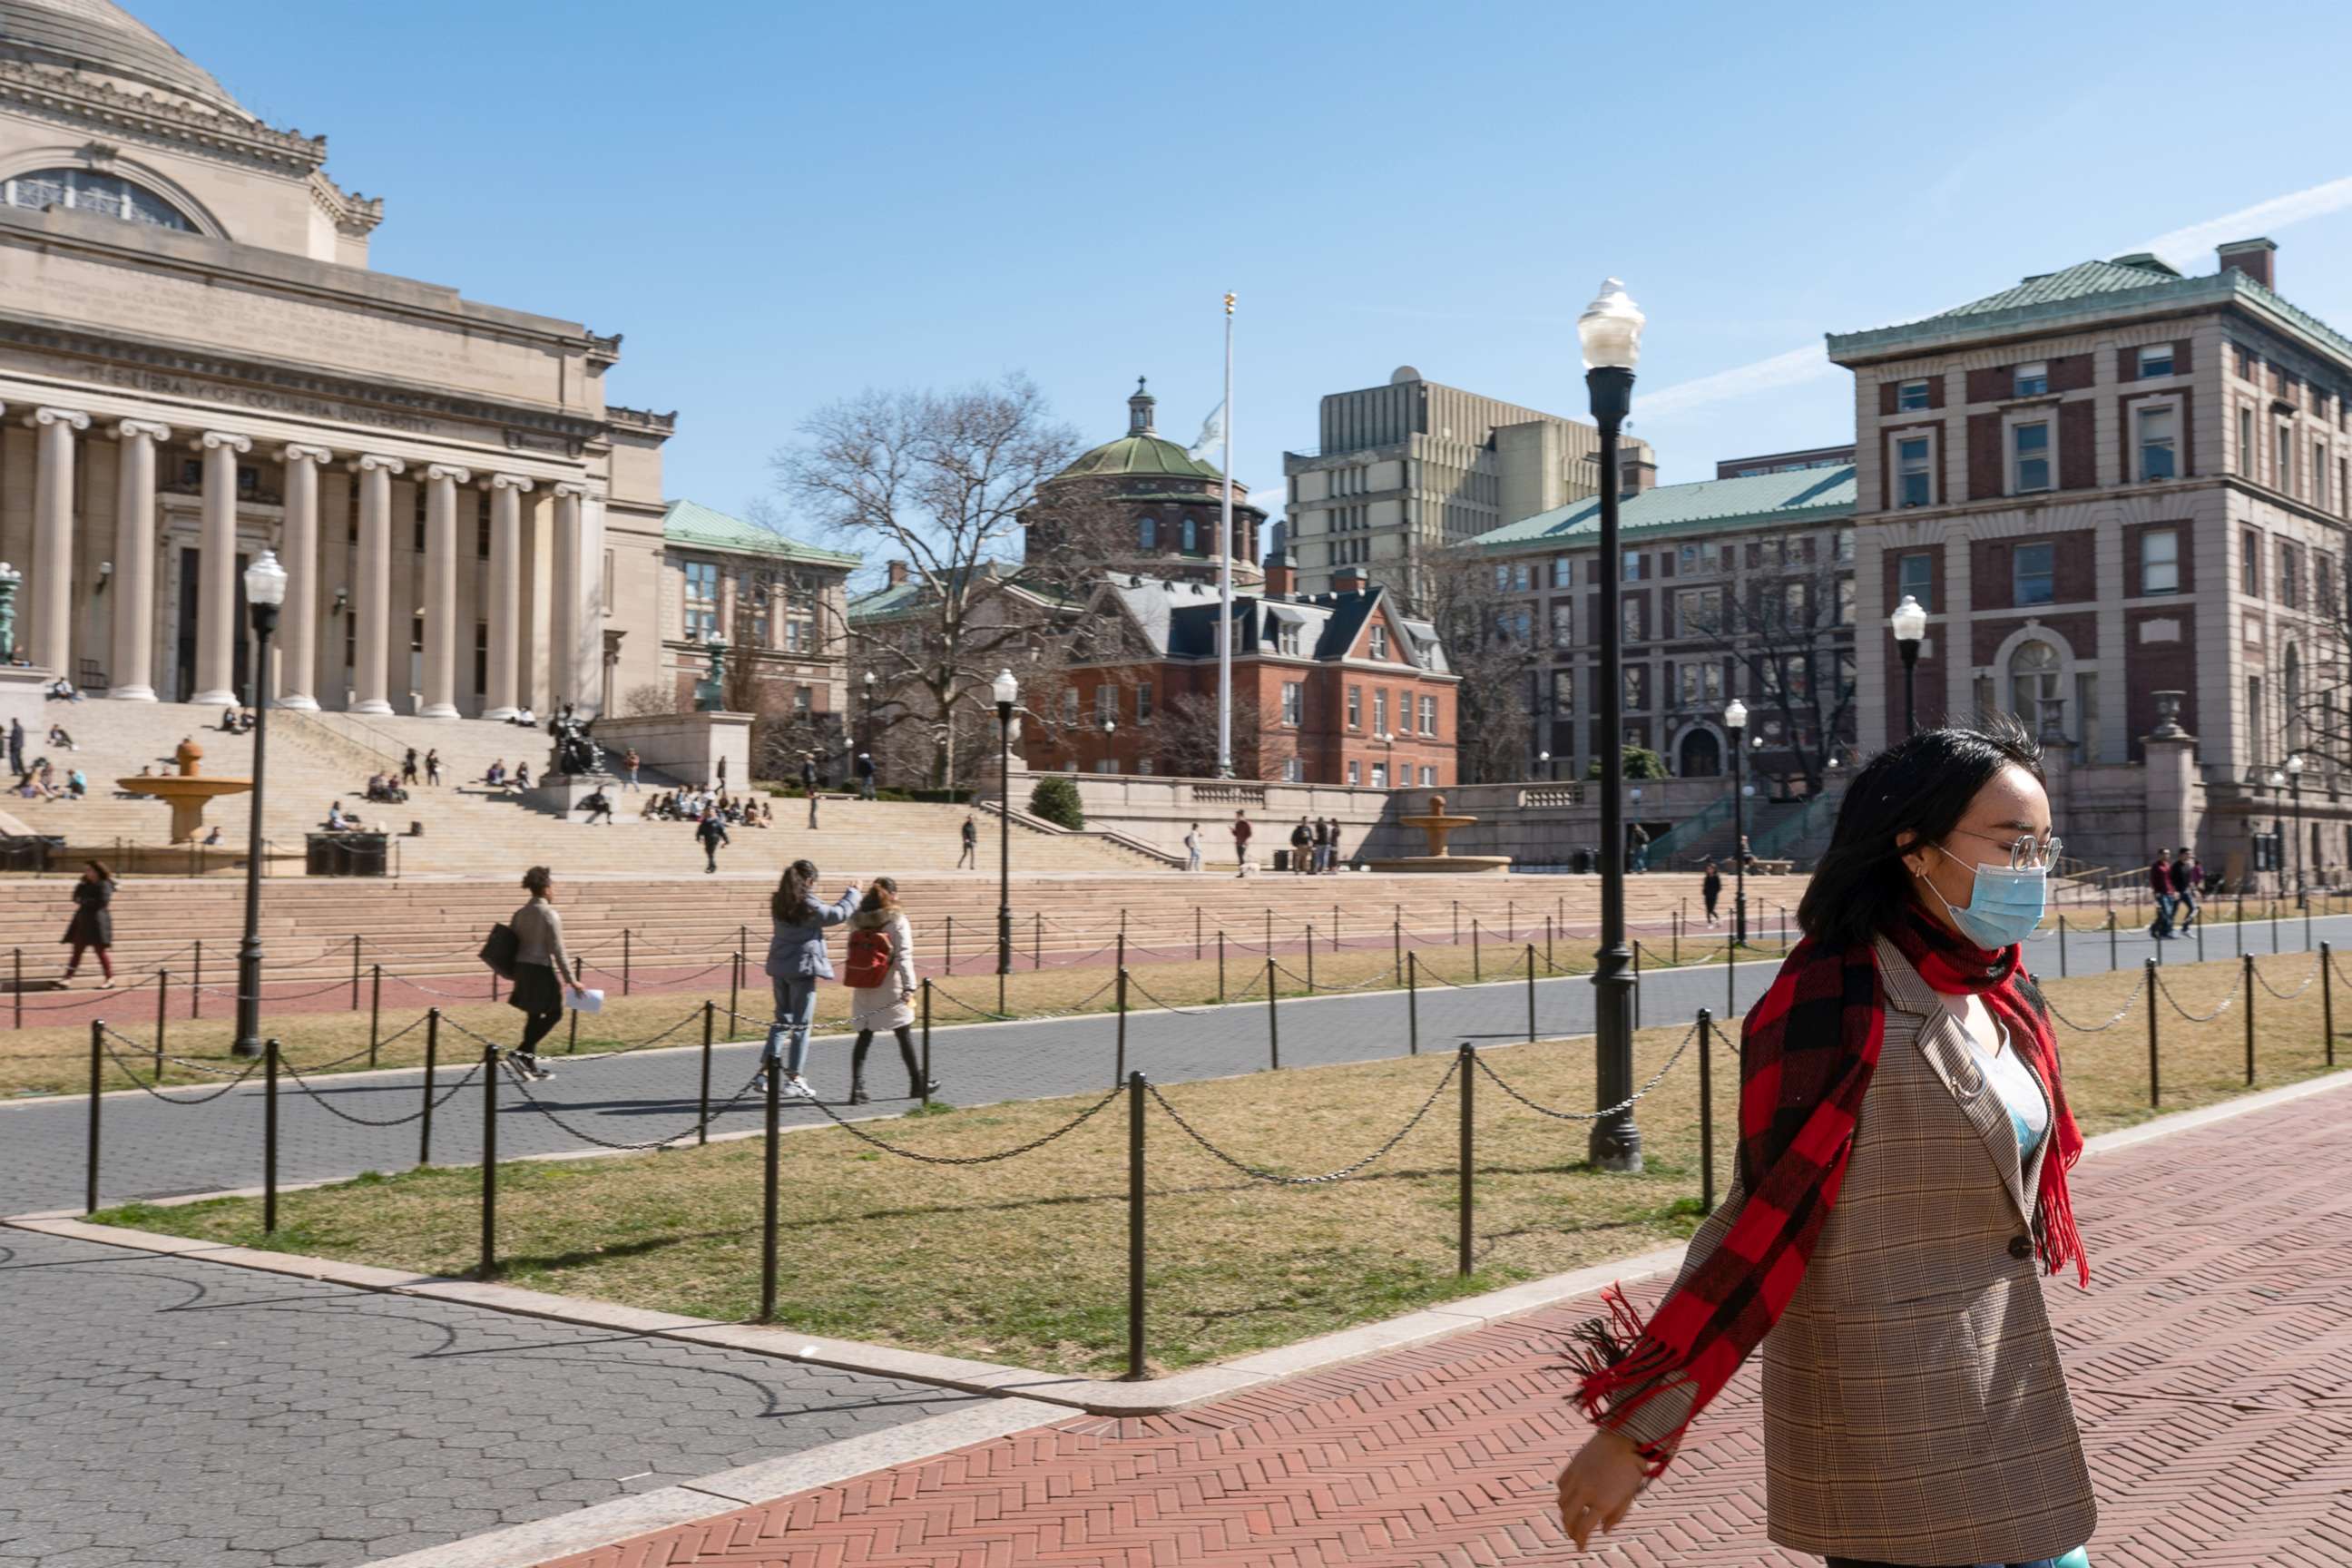 PHOTO: In this file photo, a woman wearing a protective mask walks on the Columbia University campus on March 9, 2020 in New York.